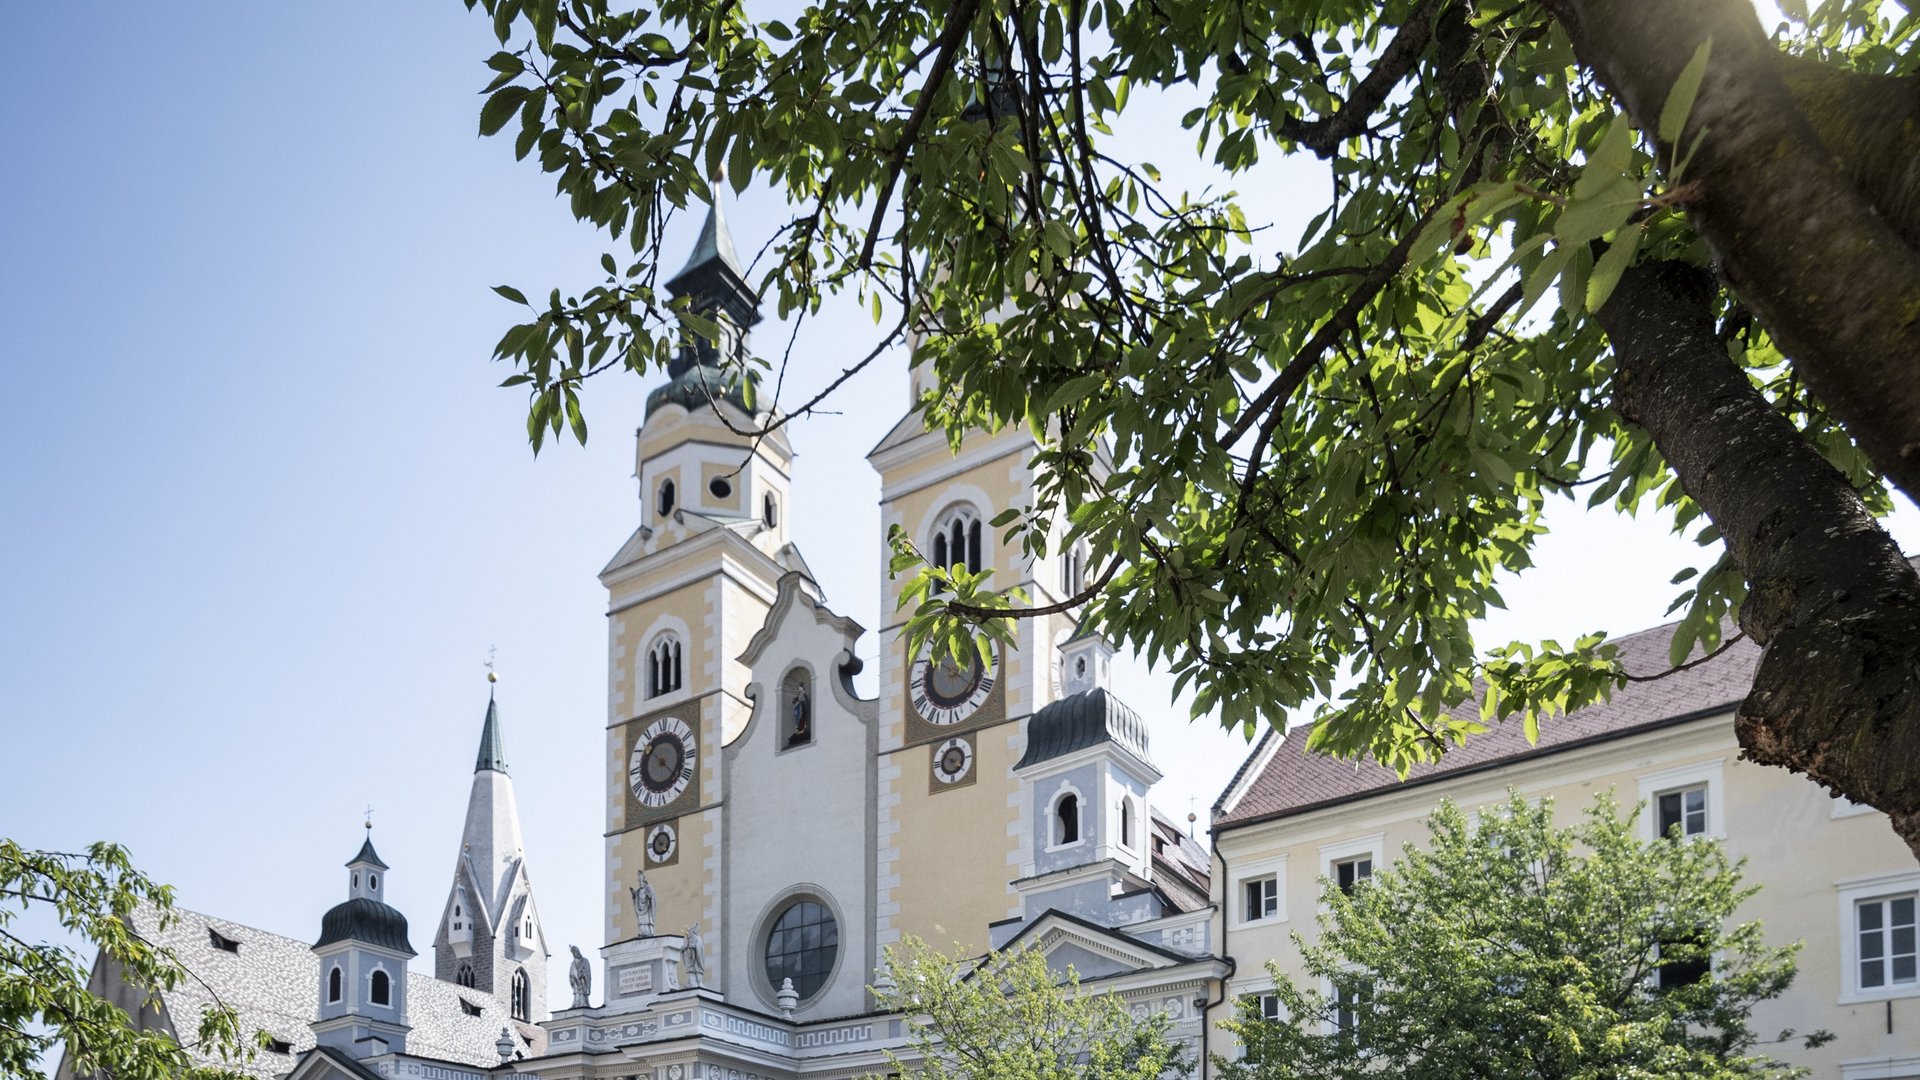 Spend your holiday in Brixen, South Tyrol.